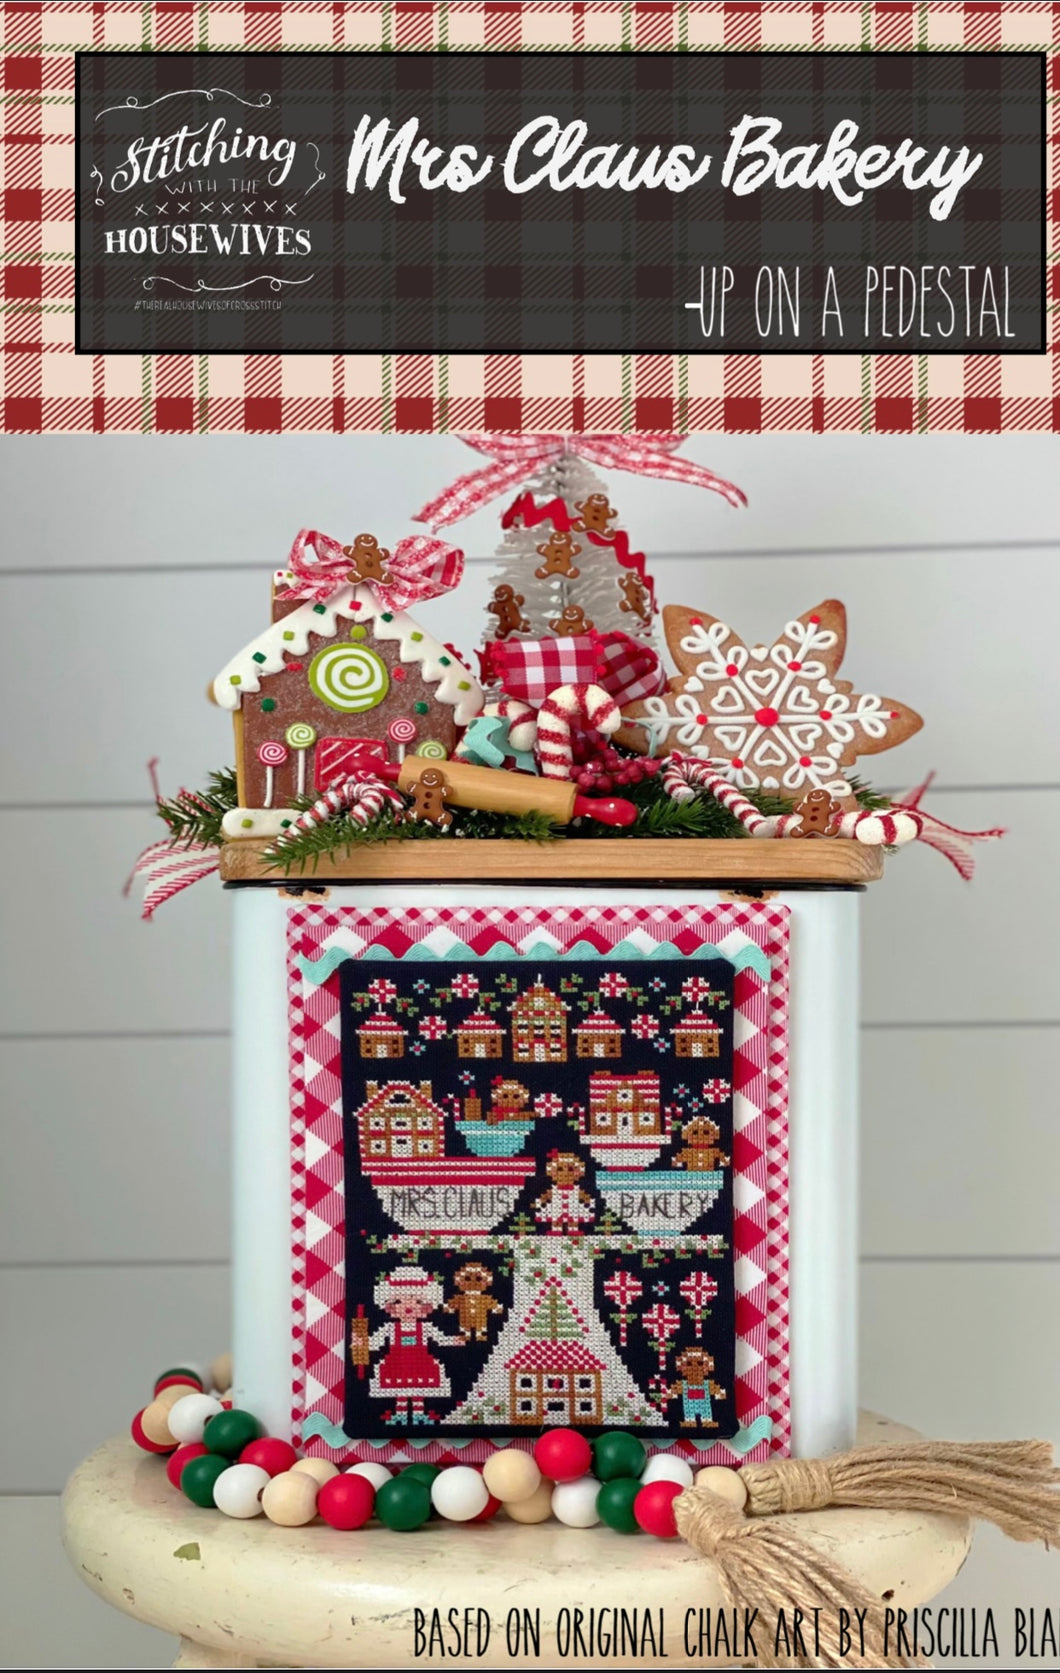 Mrs. Claus Bakery by Stitching with the Housewives